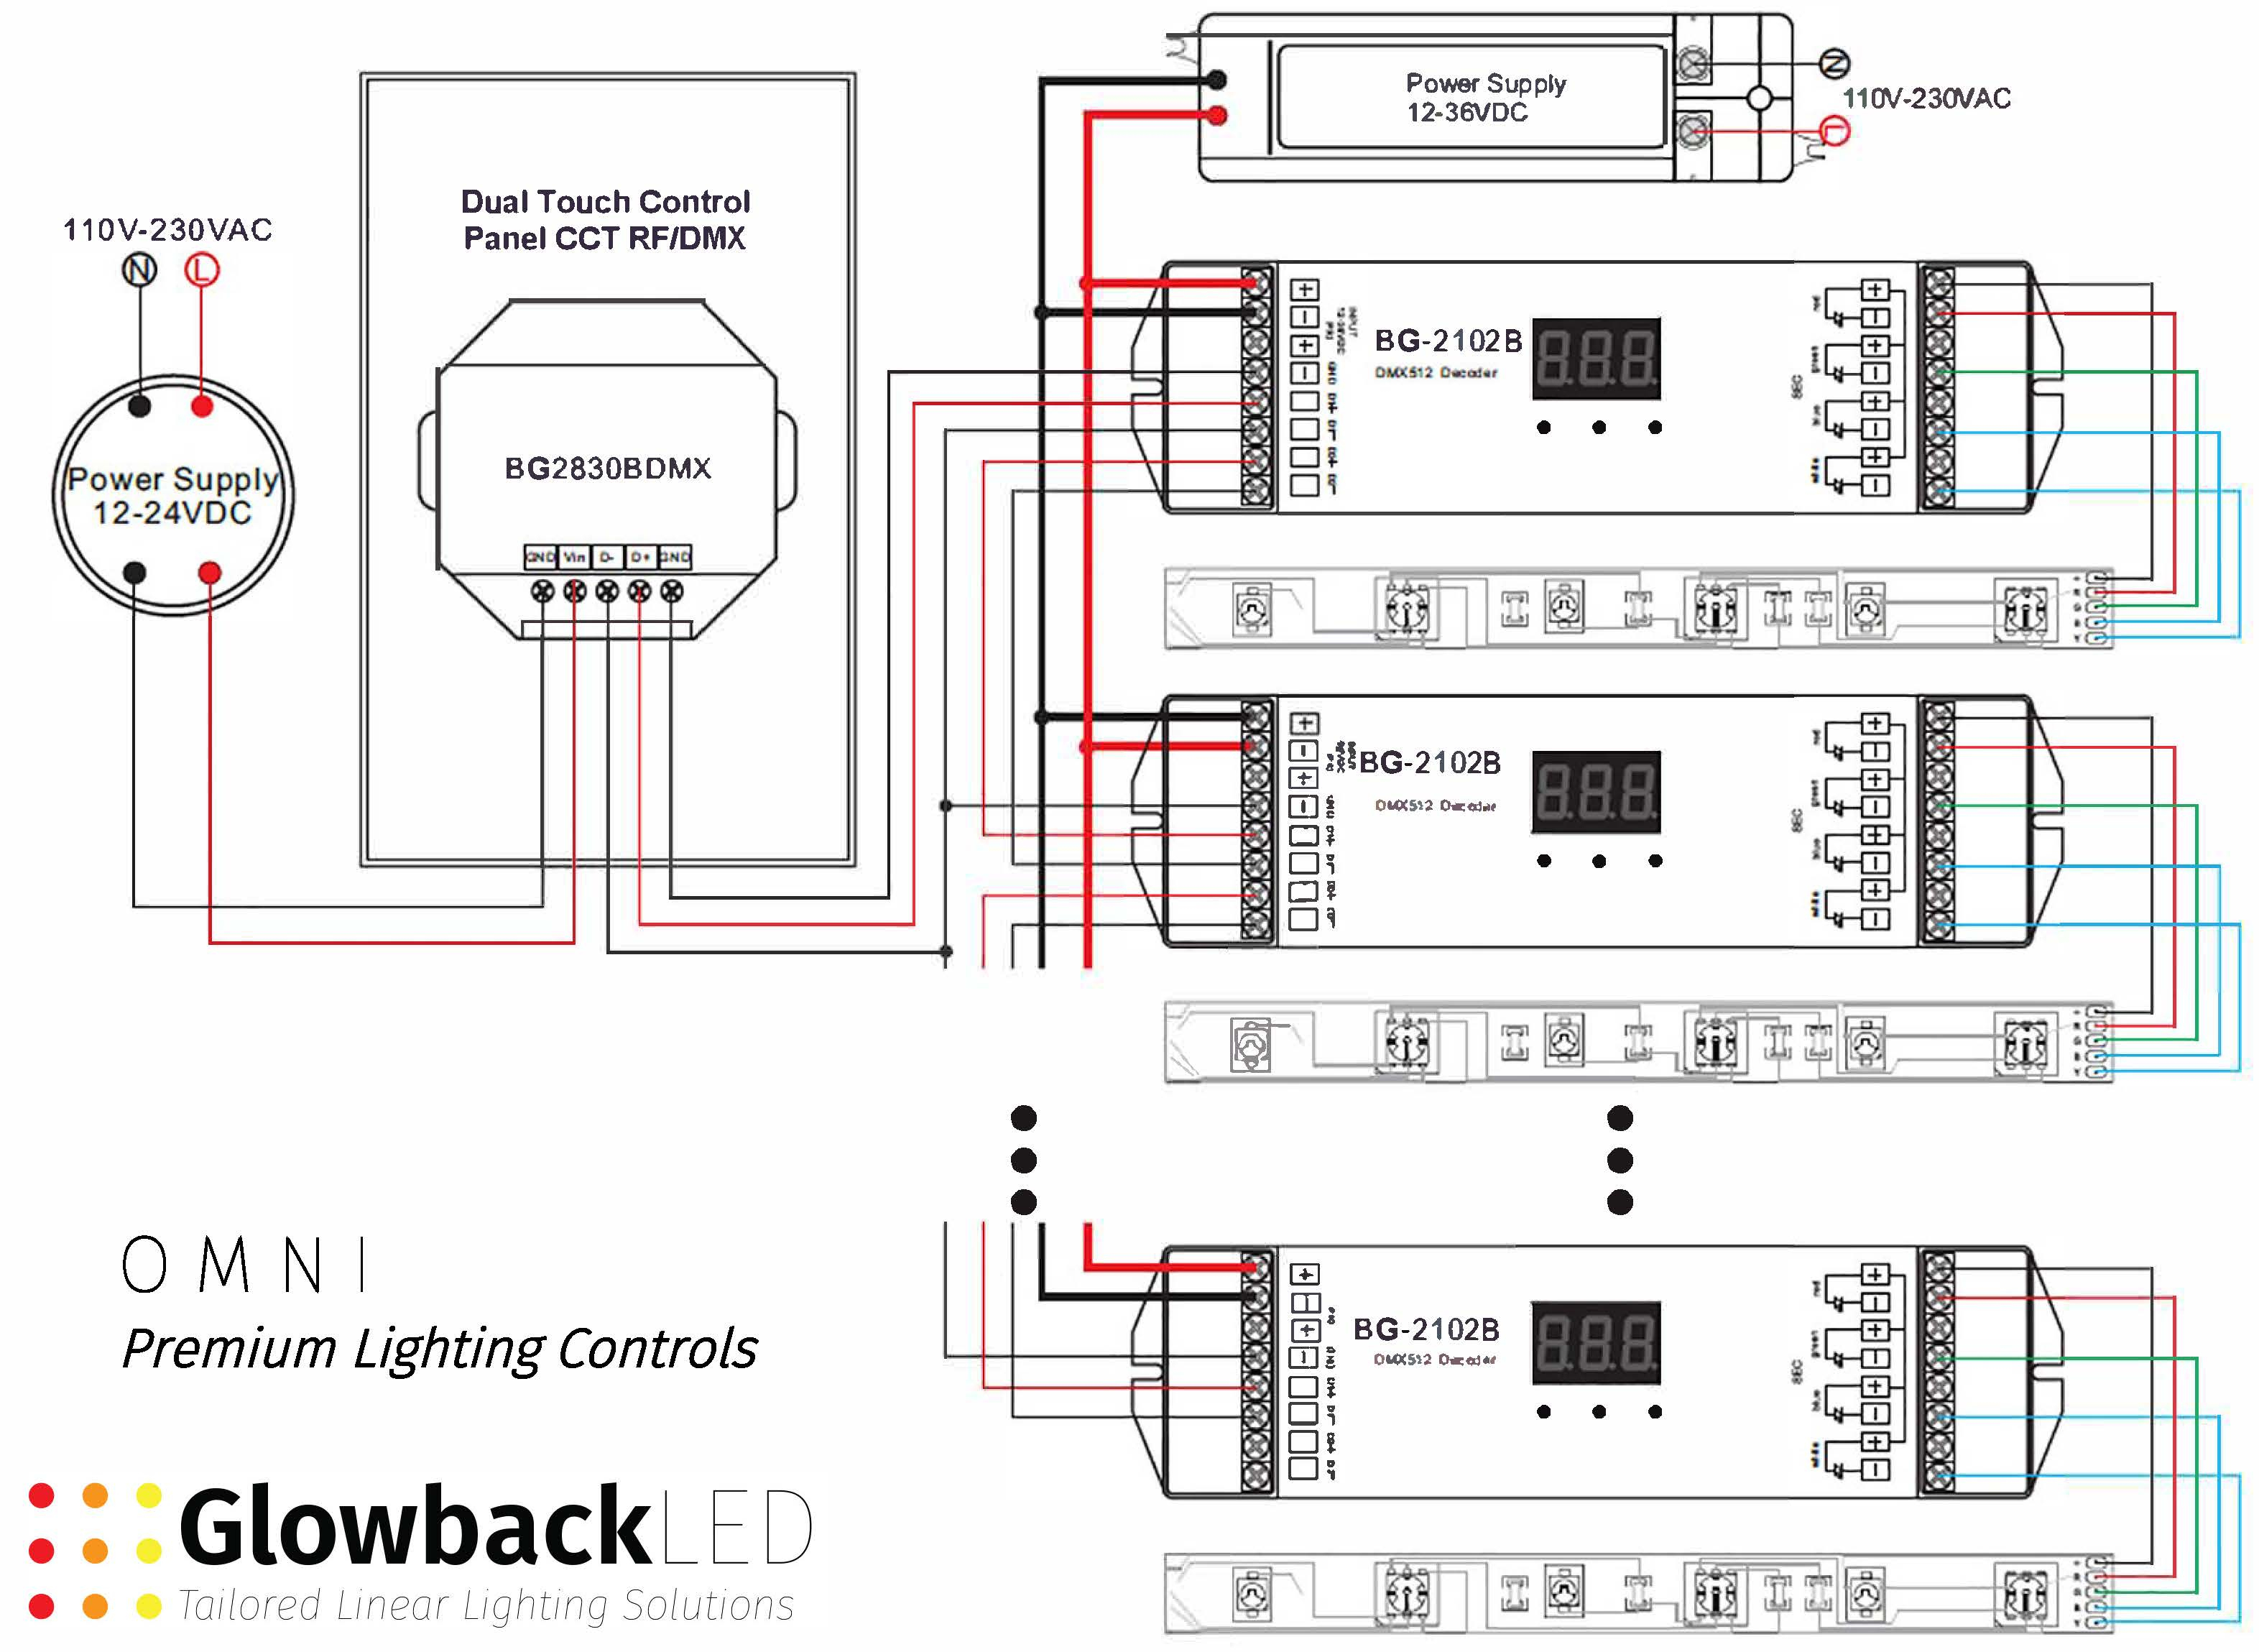 Wiring Diagram For Dmx Controllers | Led Lighting Diagram - Led Lighting Wiring Diagram